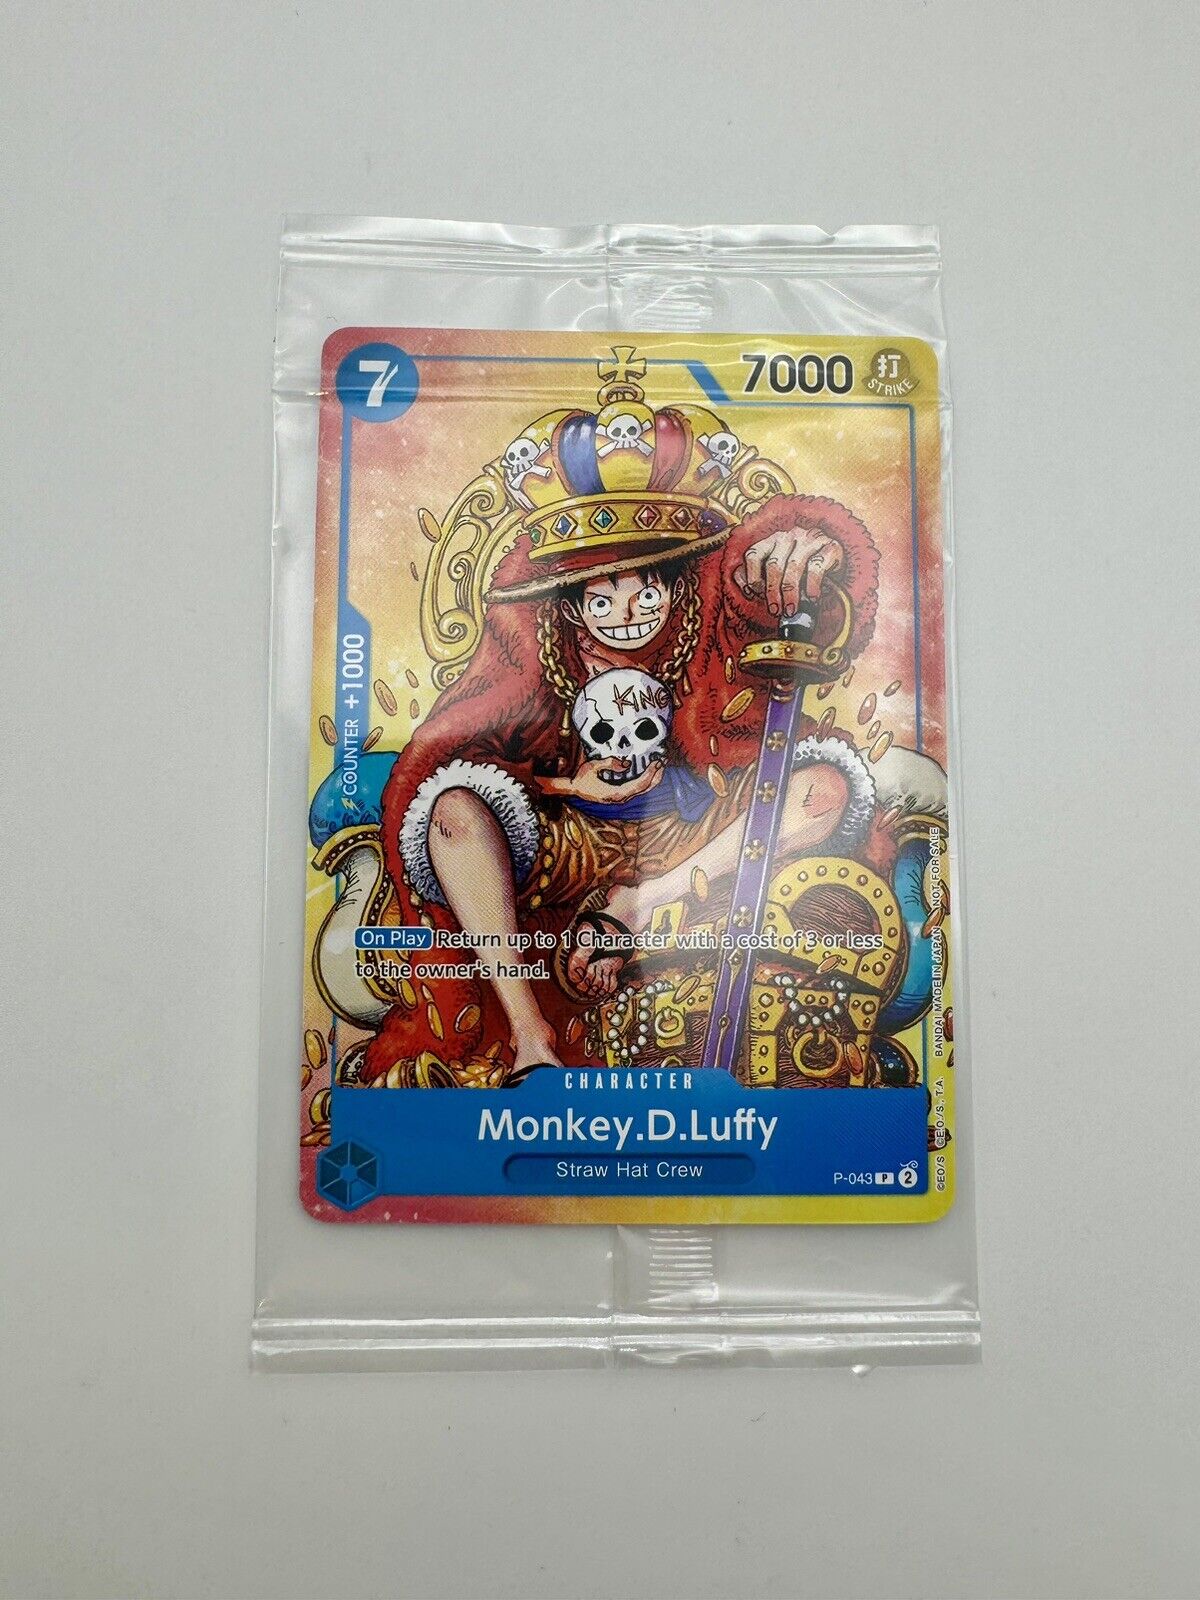 Monkey .D. Luffy - P-043 - Exclusive Treasure Cup Promo - One Piece Card Game